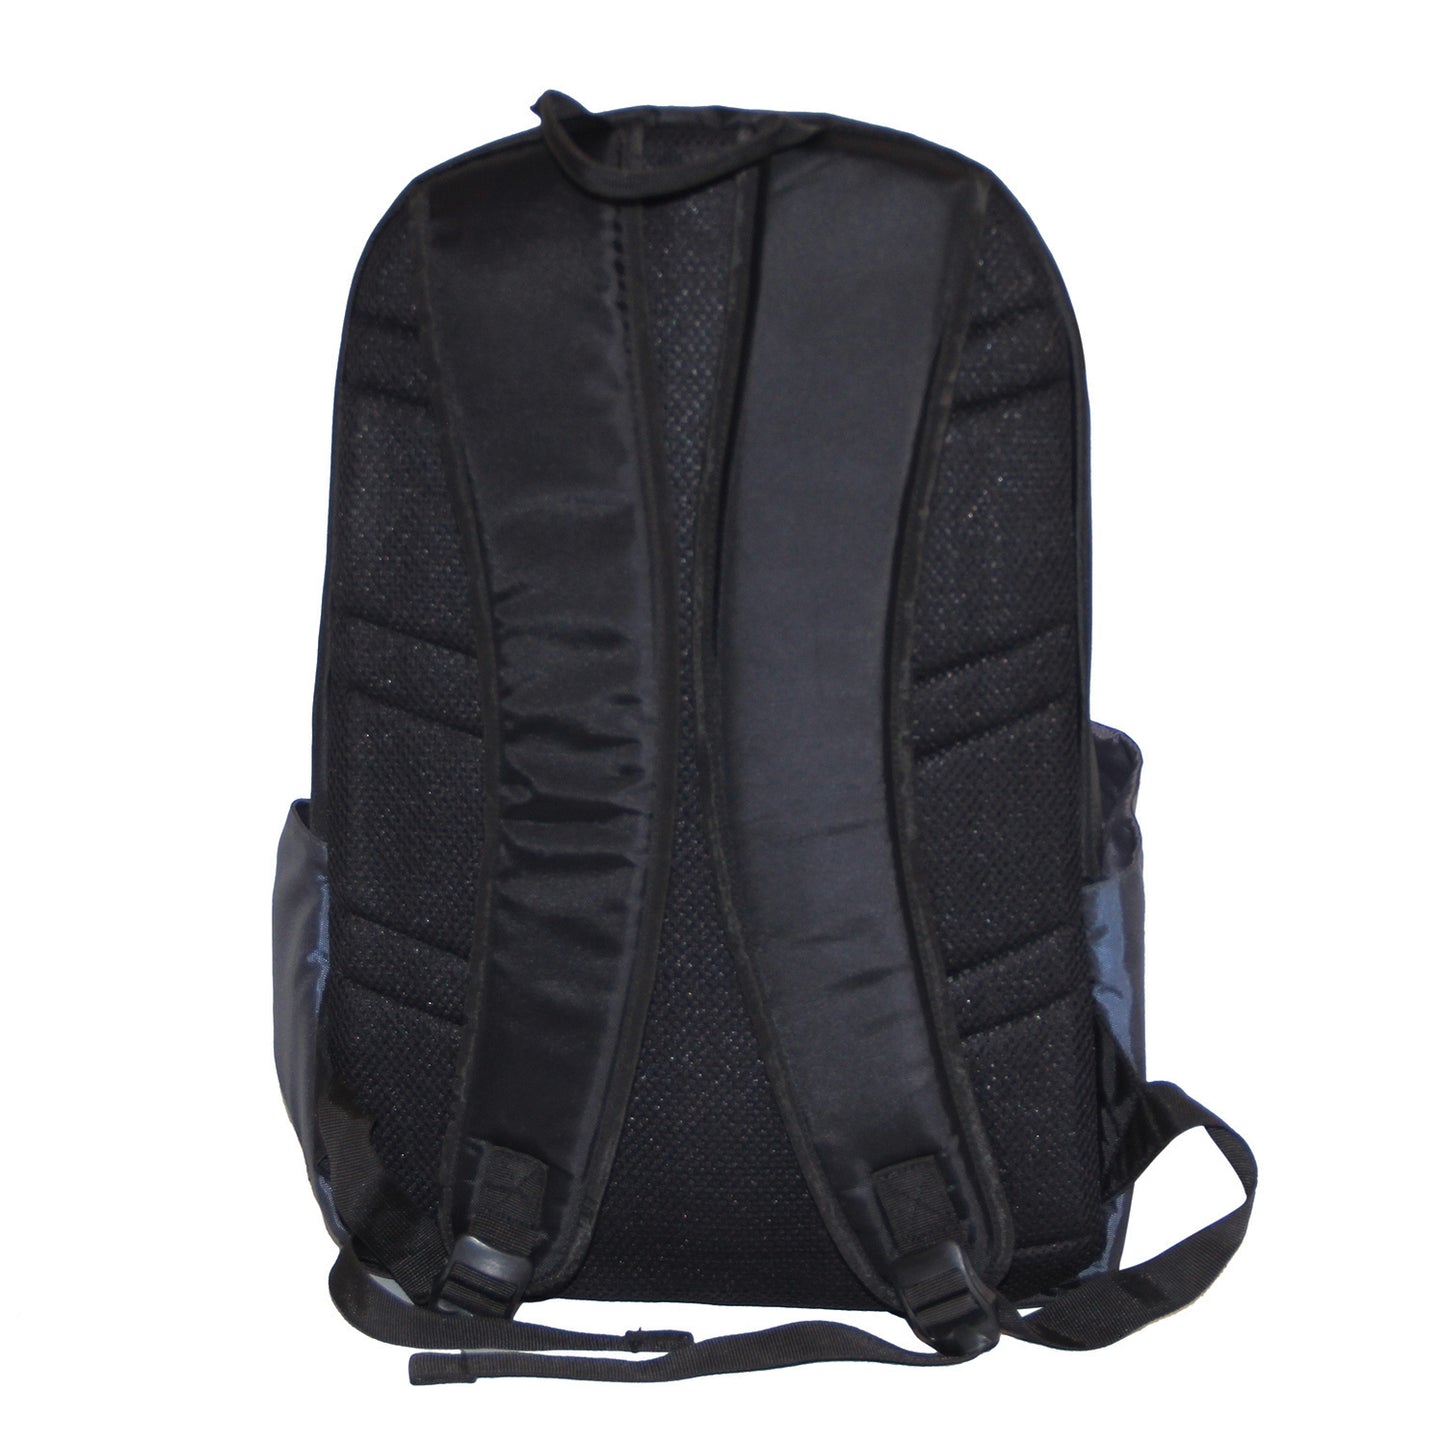 Two-Tone Commodious Backpack